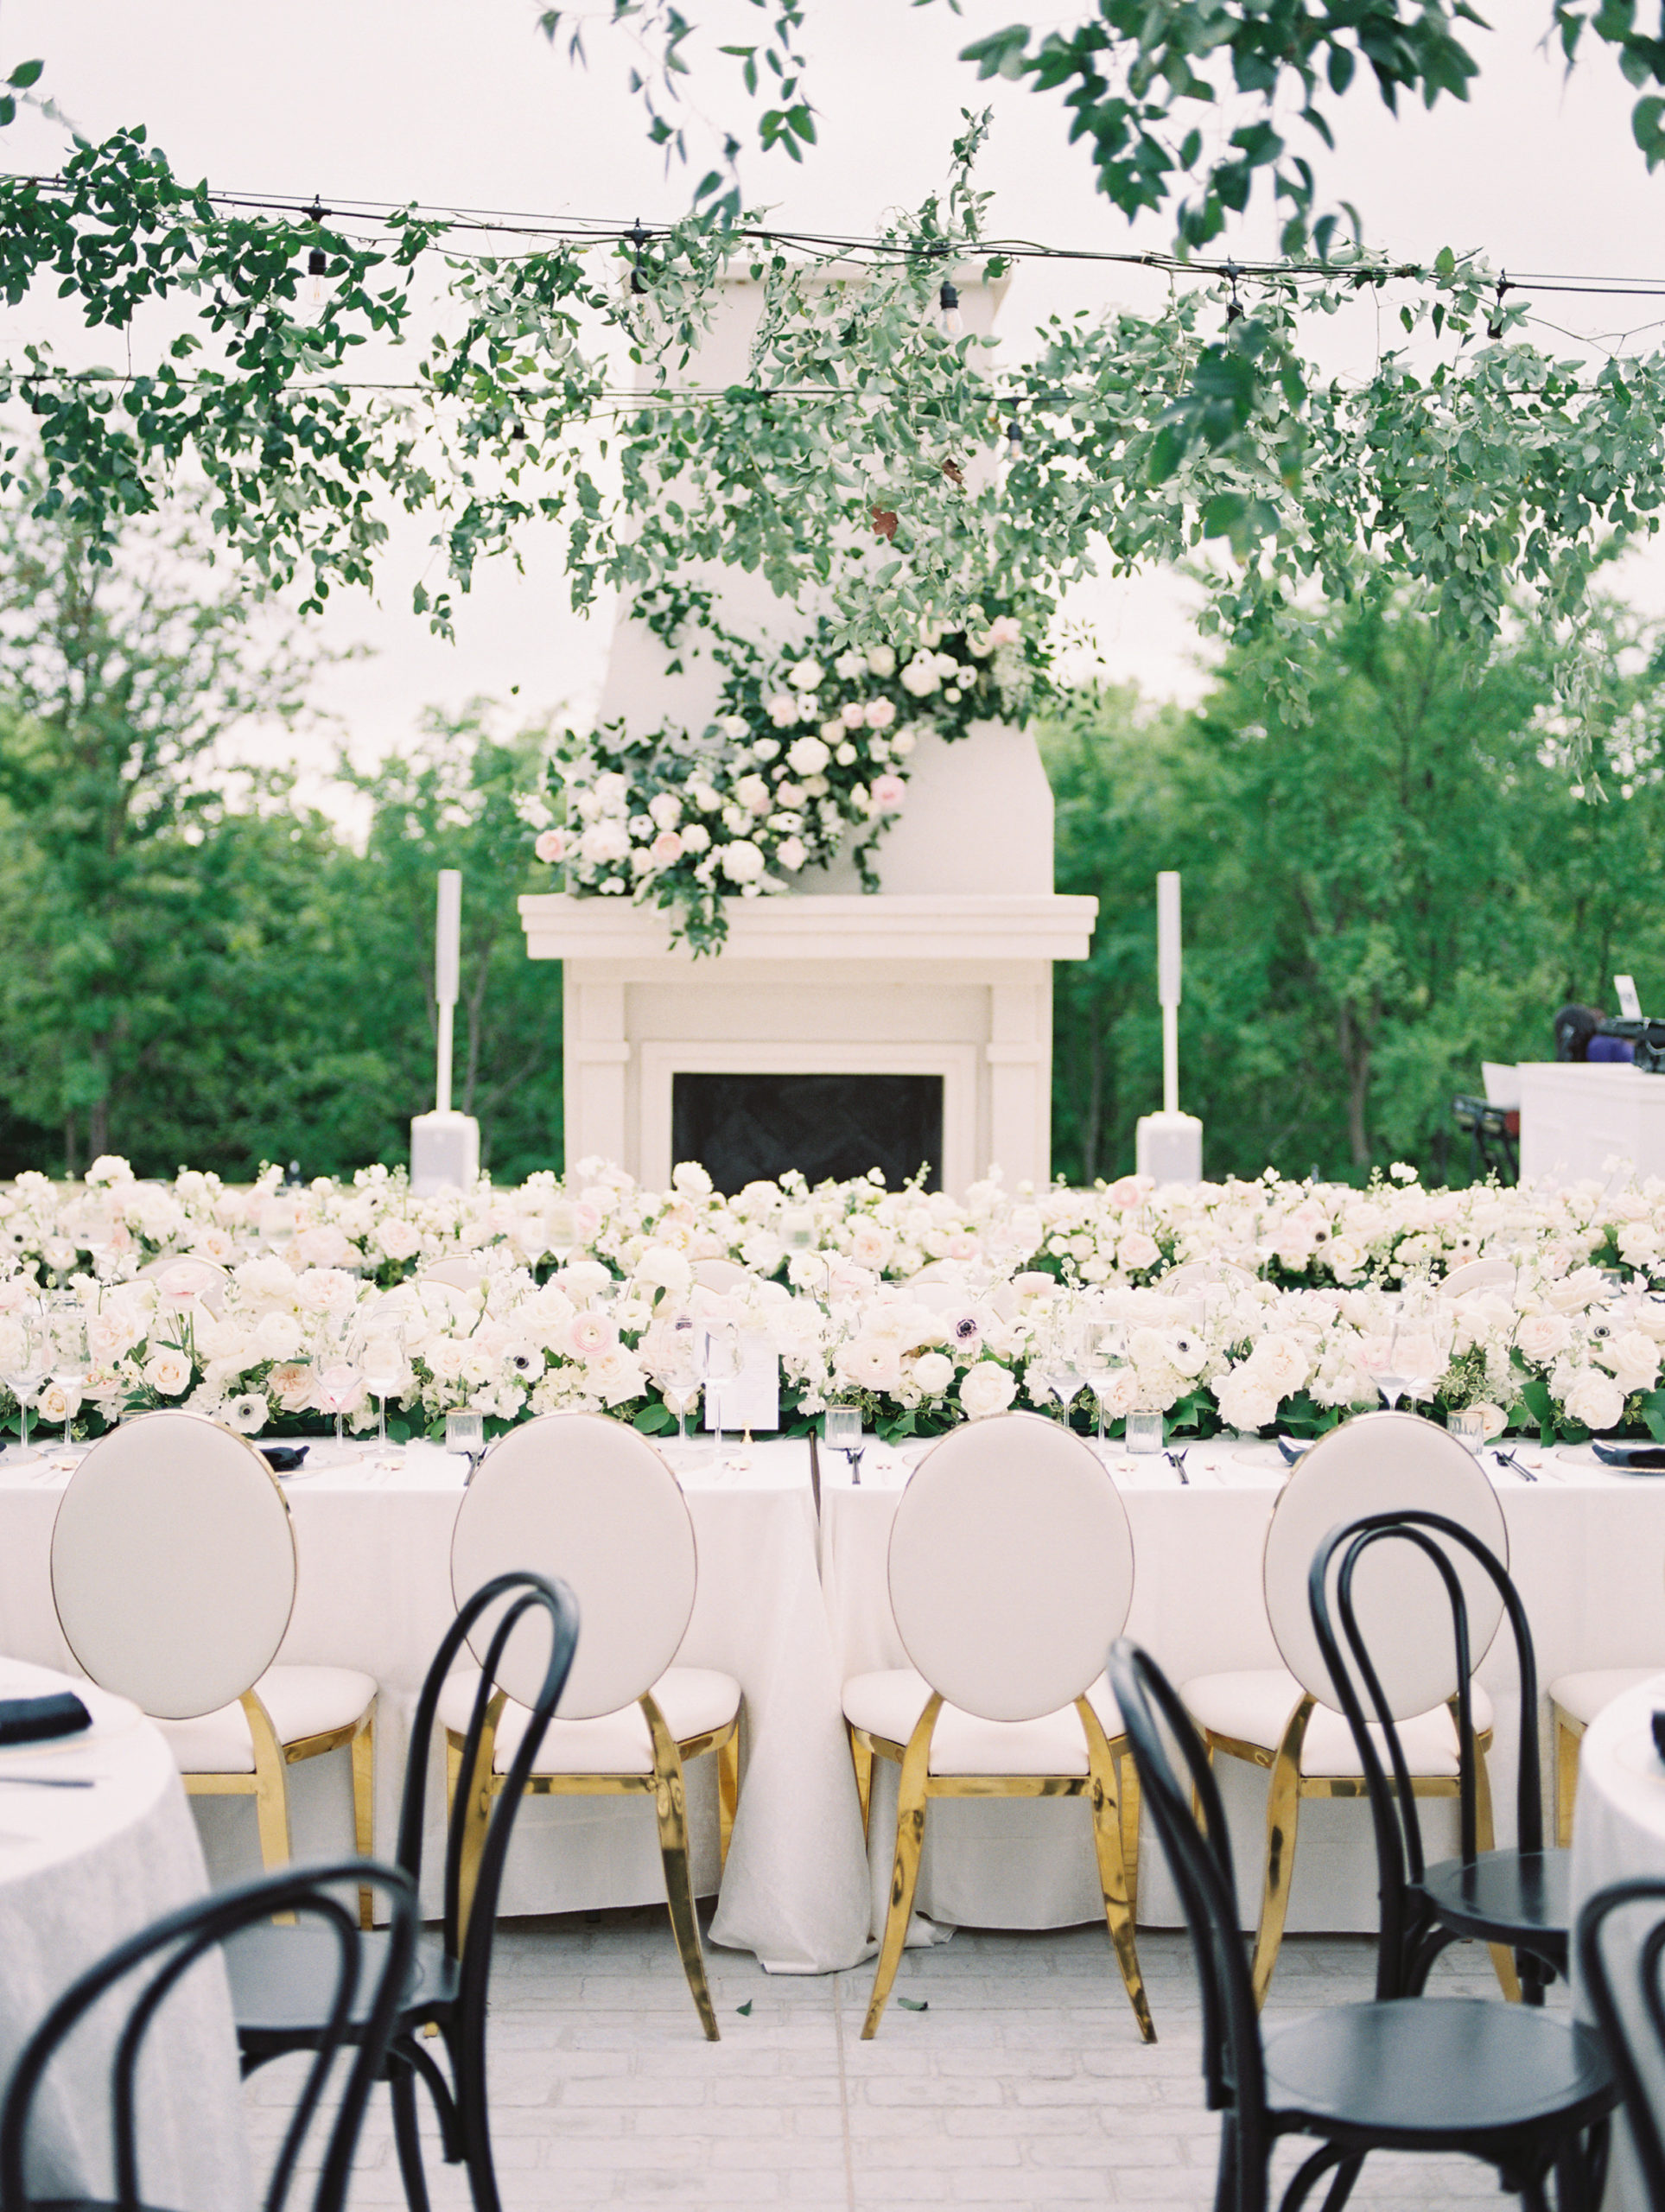 Modern, timeless wedding reception seating for blogger Hoang-Kim Cung at The Hillside Estate in Dallas, TX